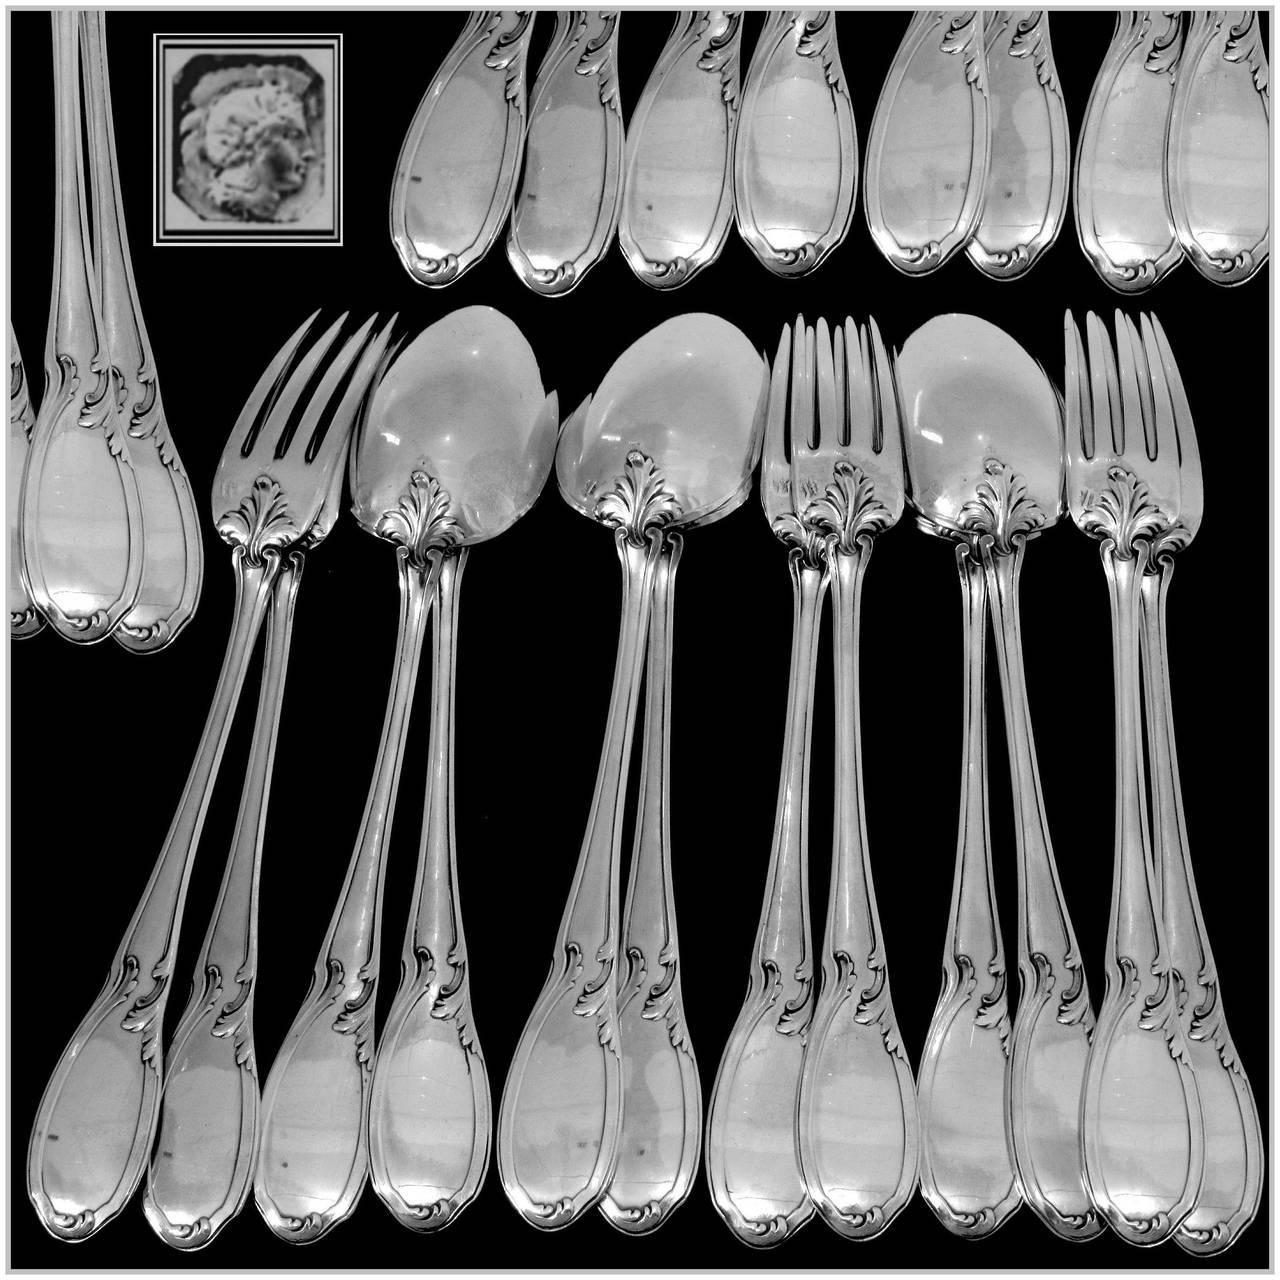 Head of Minerve 1st titre for 950/1000 French sterling silver guarantee

Exceptional French sterling silver dessert entremet flatware 12 pieces Rococo style. No monograms. Two sets available.

Prestigious silversmith :
Paul Canaux Cie
30